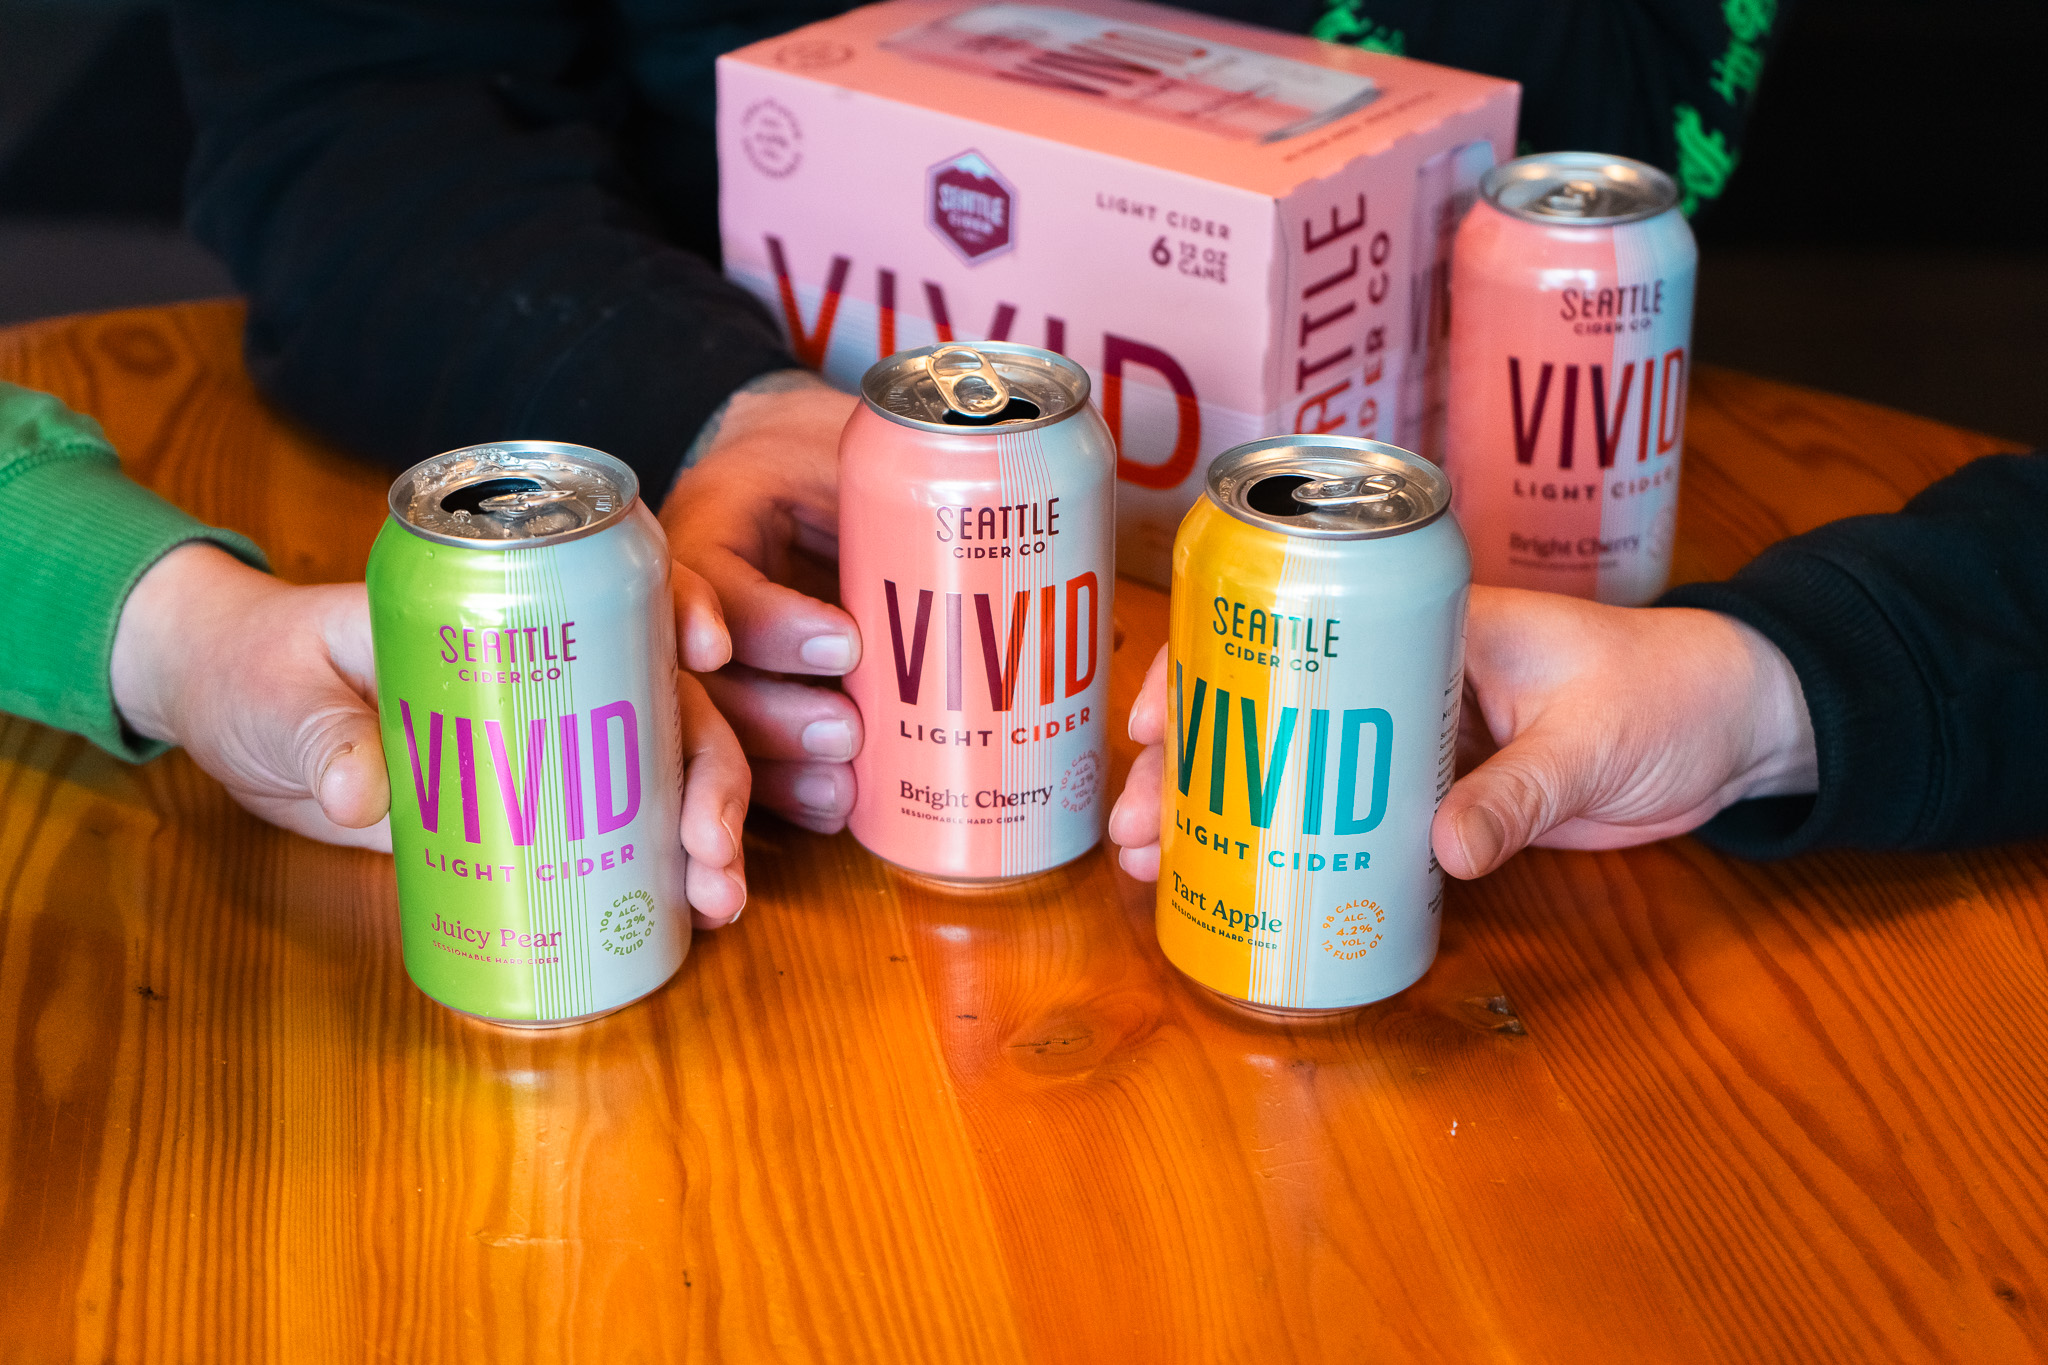 Seattle Cider Co Launches VIVID Light Cider in Washington with Four New Crisp and Refreshing Flavors